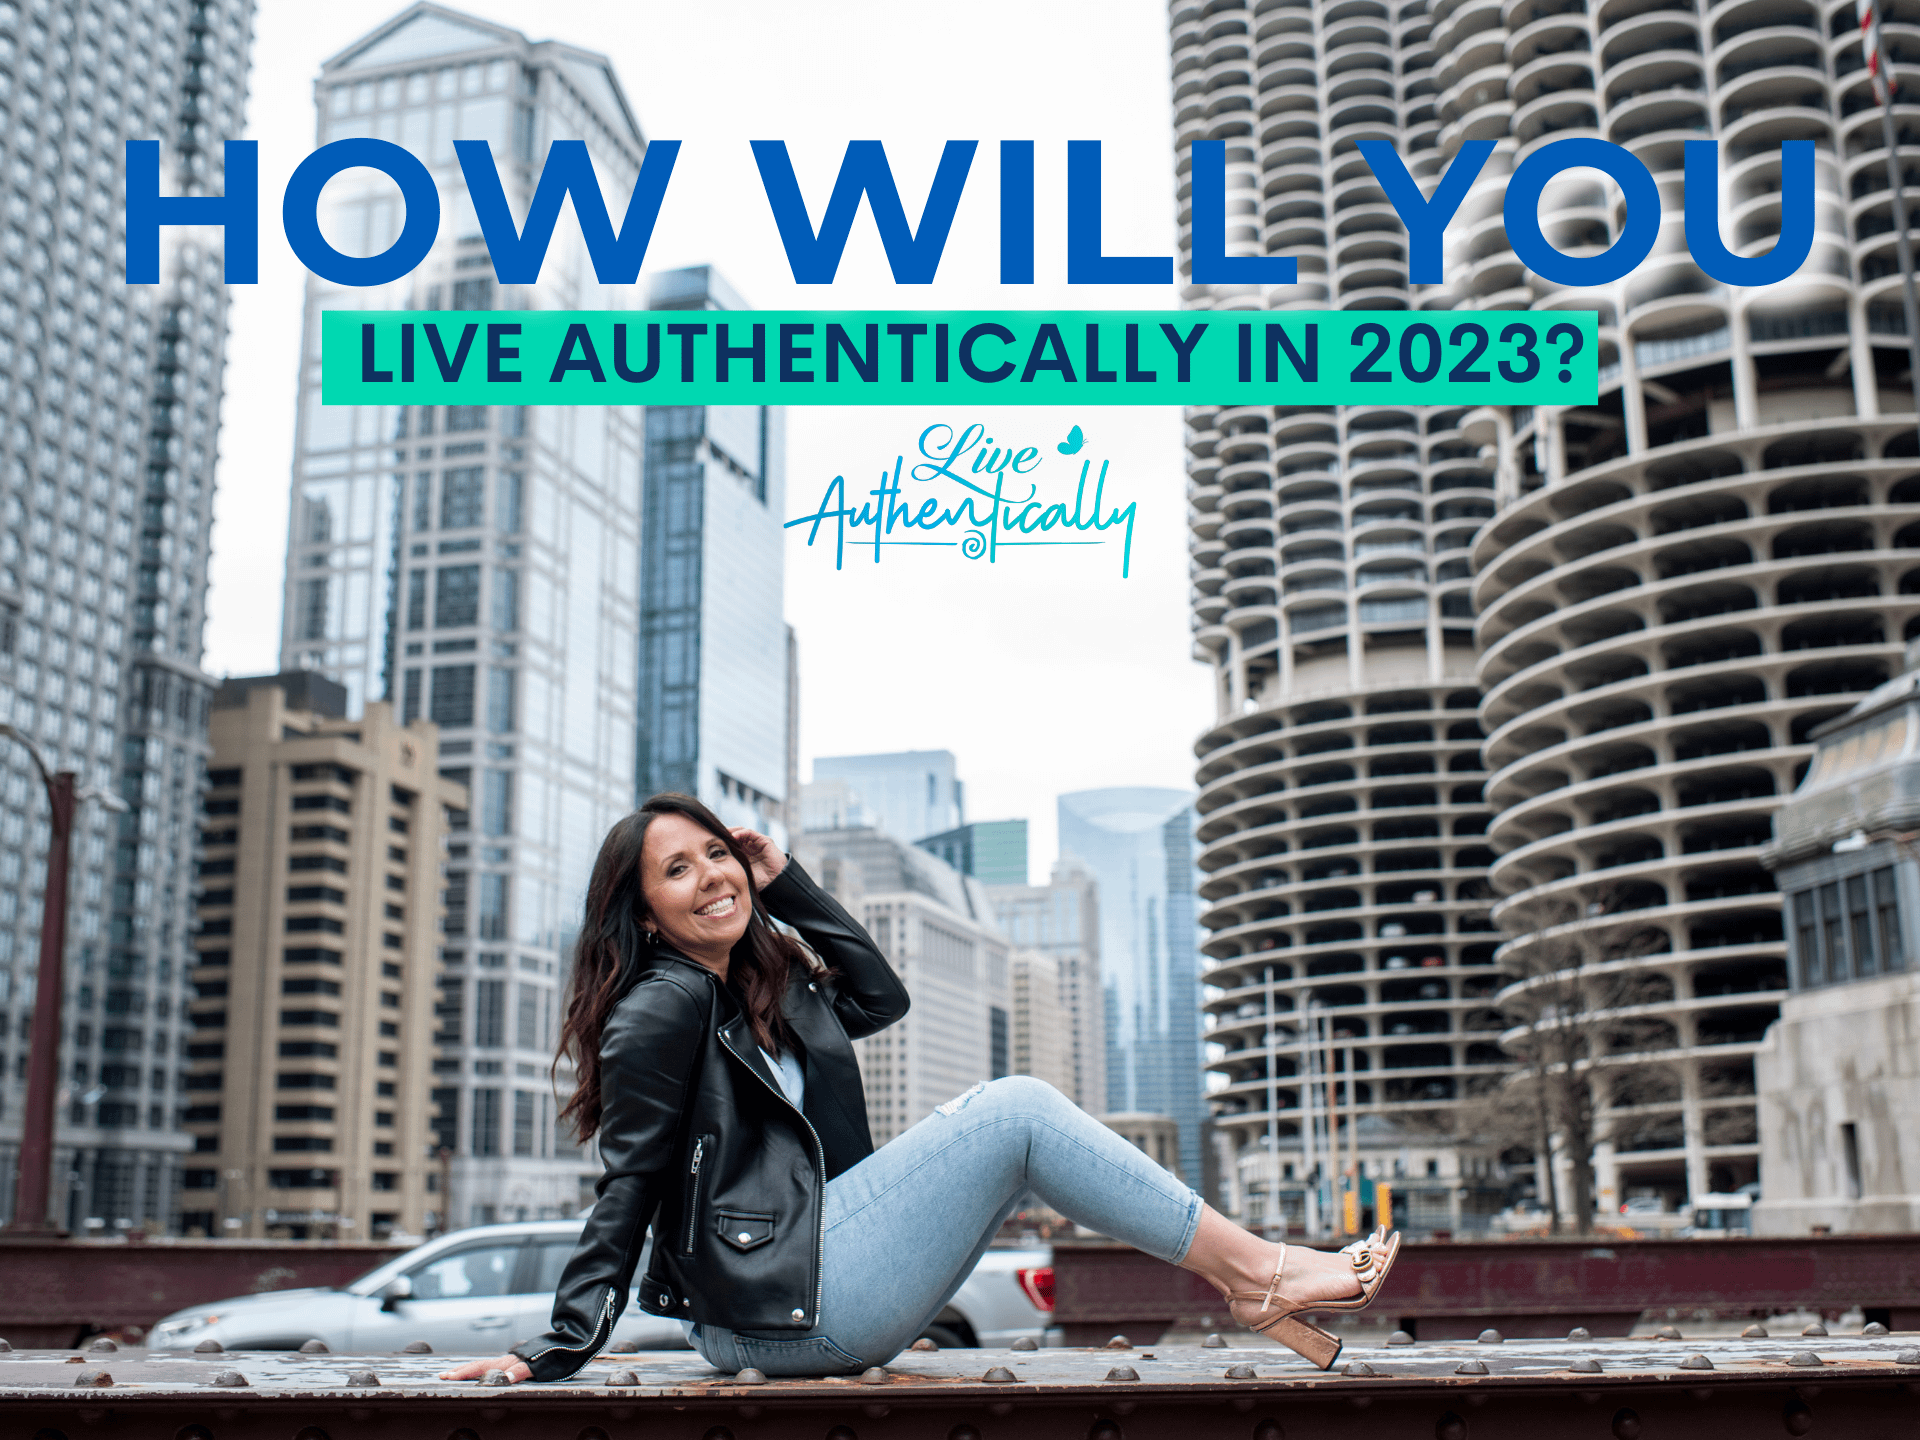 How Will You Live Authentically in 2023